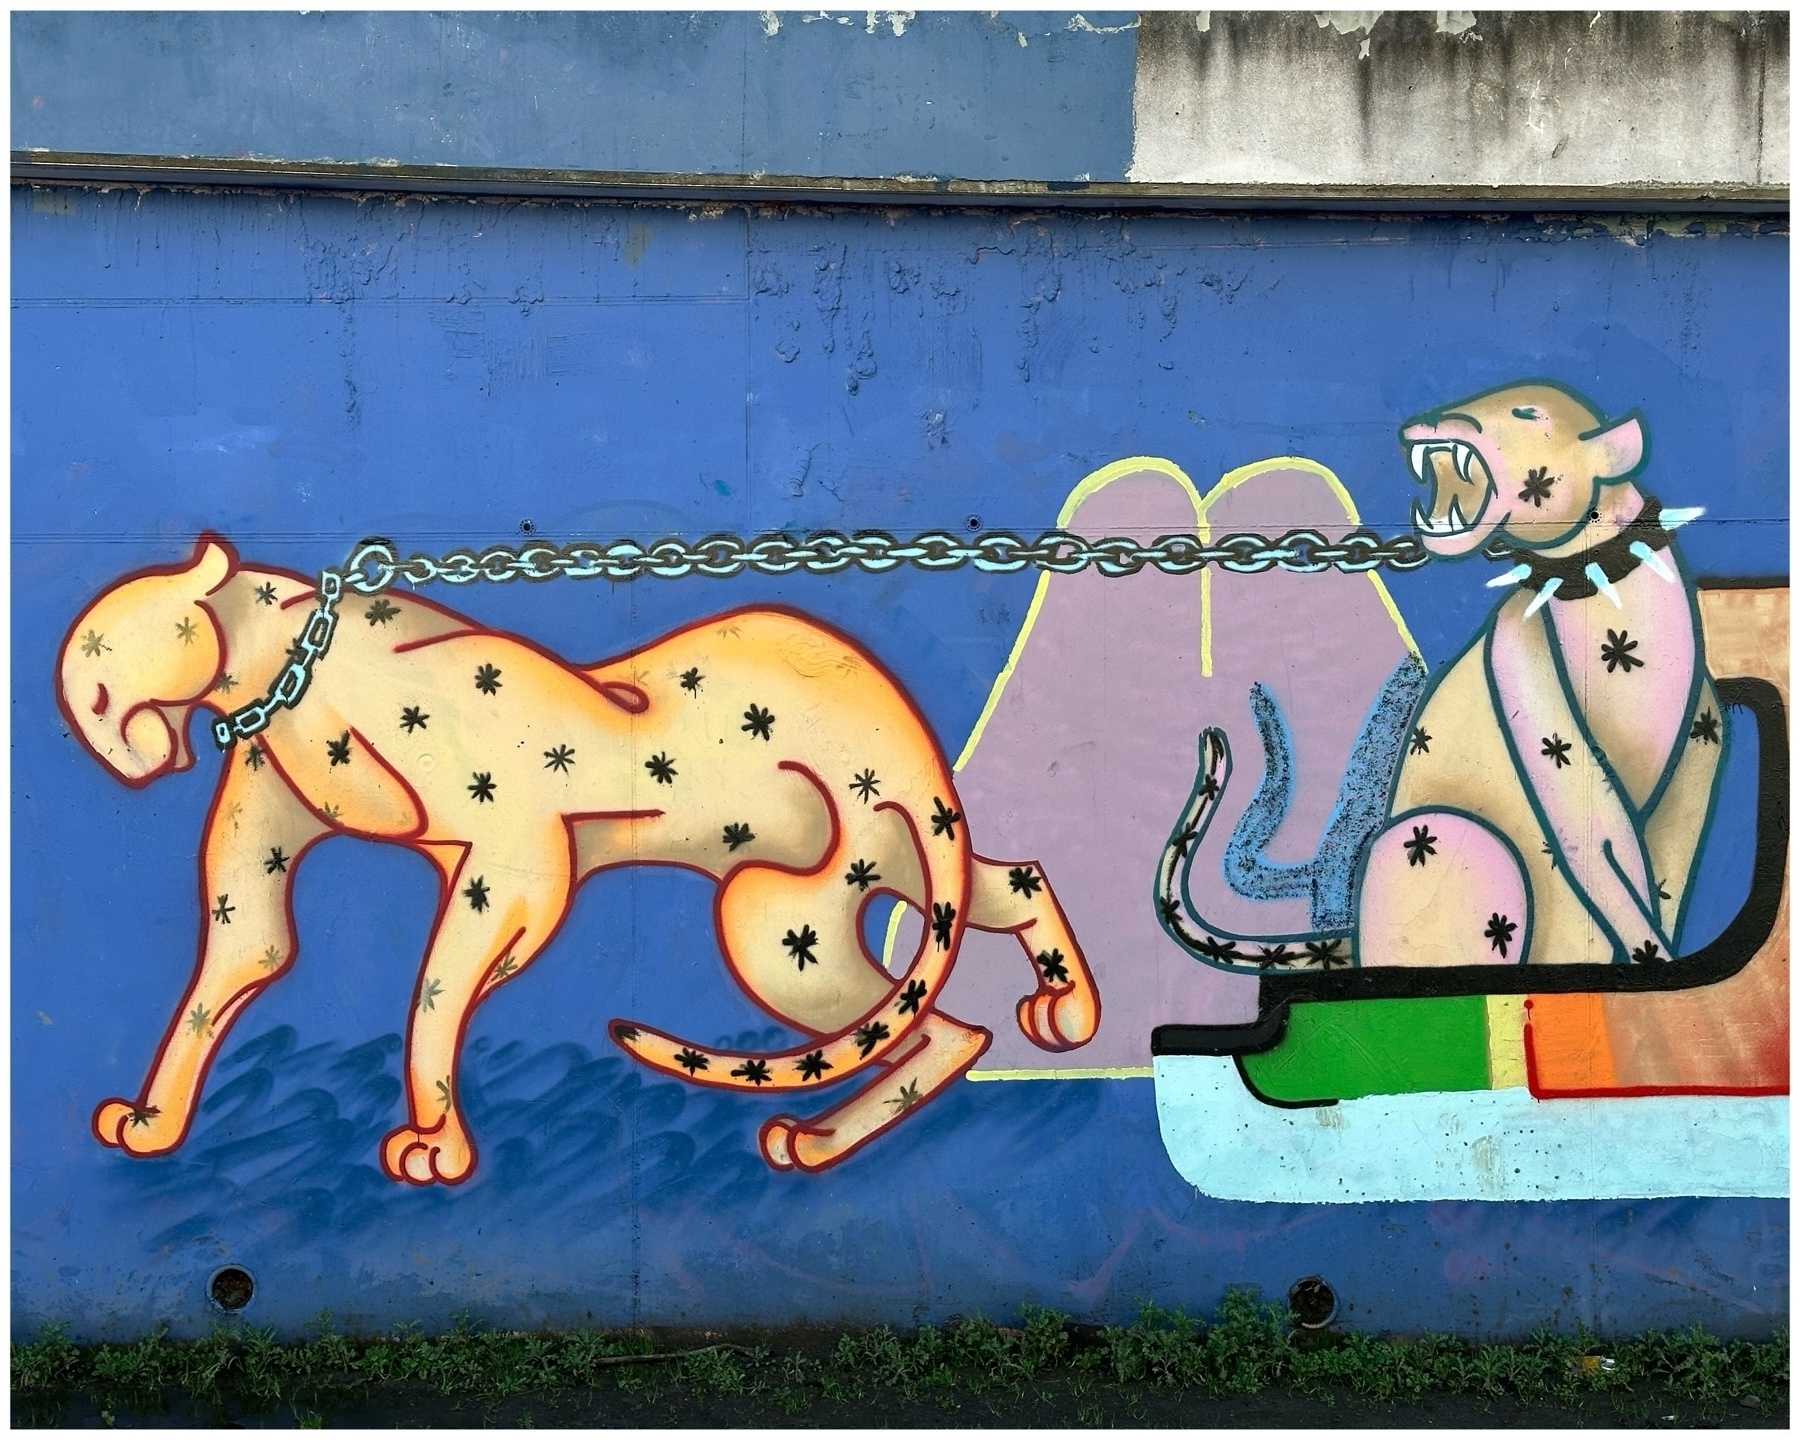 Graffiti depicting two stylized, panther-like creatures connected by a chain. The creature on the left, in a calm posture, has a chain collar. The one on the right is in an aggressive stance, showing its teeth.